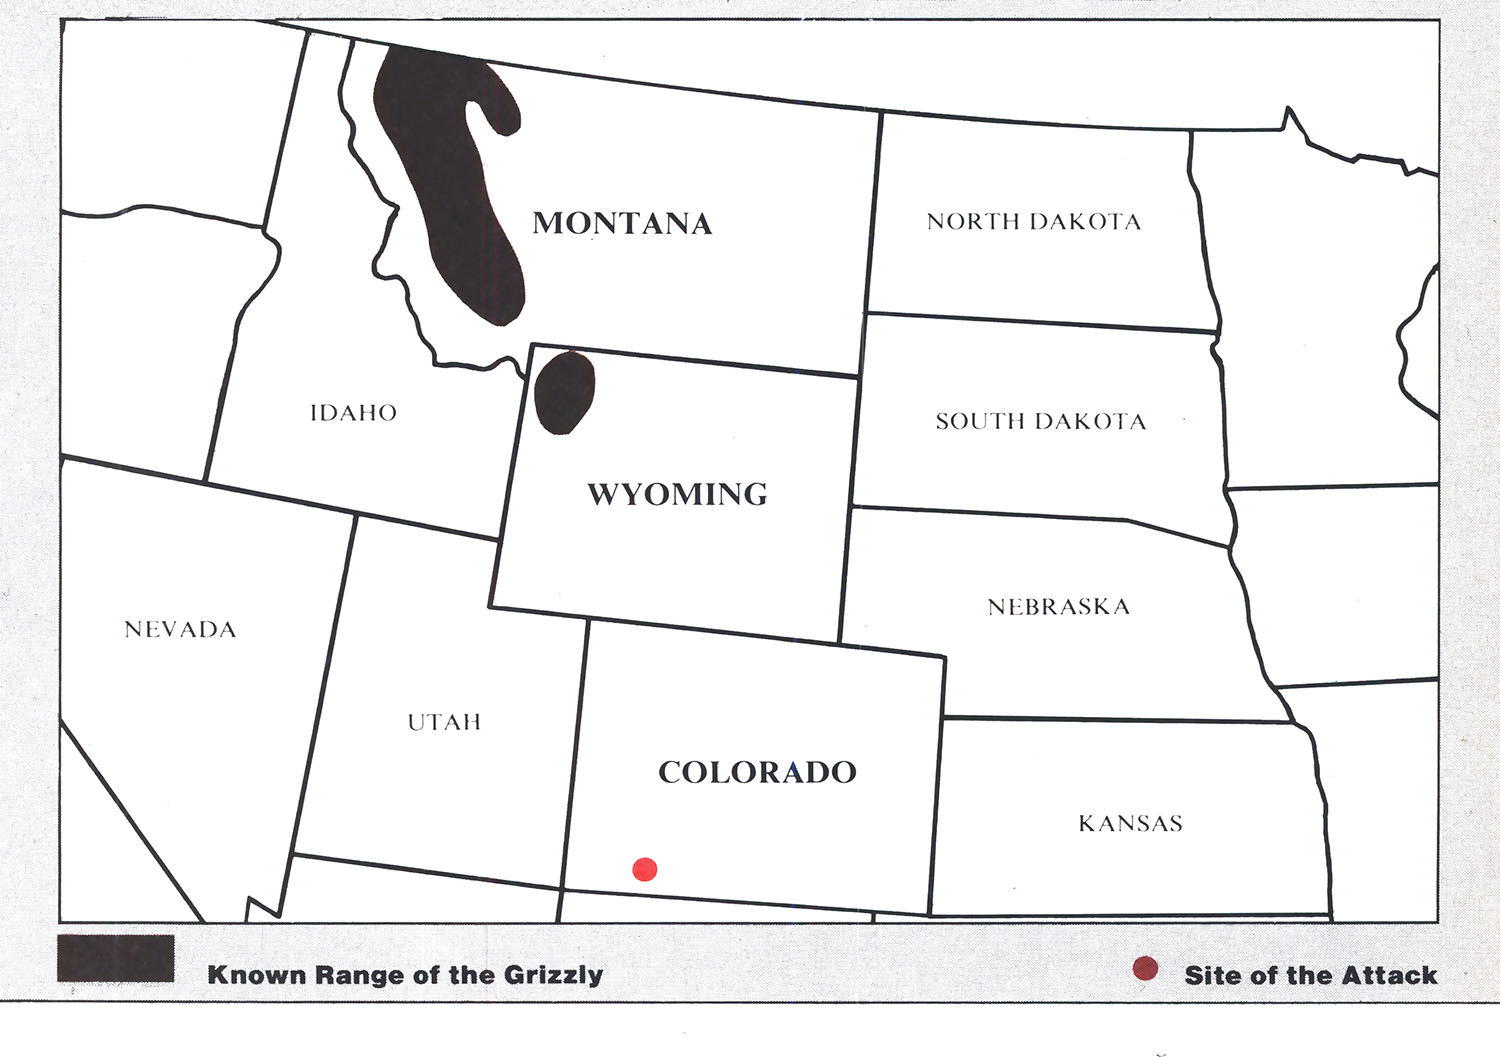 map showing site of bear attack and known grizzly range in 1980